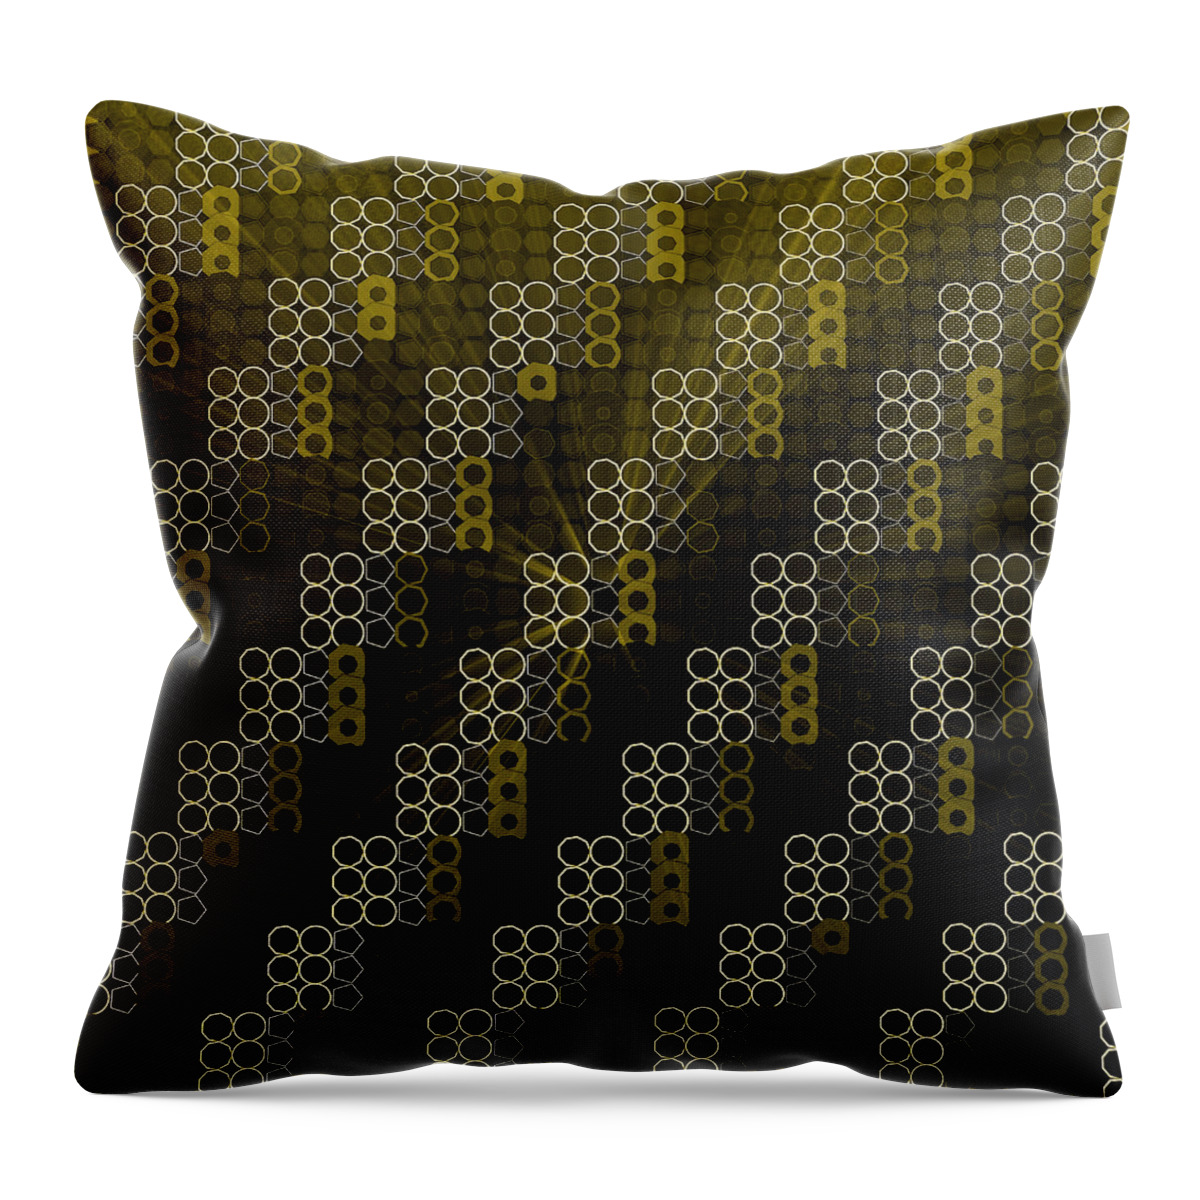 Abstract Throw Pillow featuring the digital art Pattern 40 by Marko Sabotin